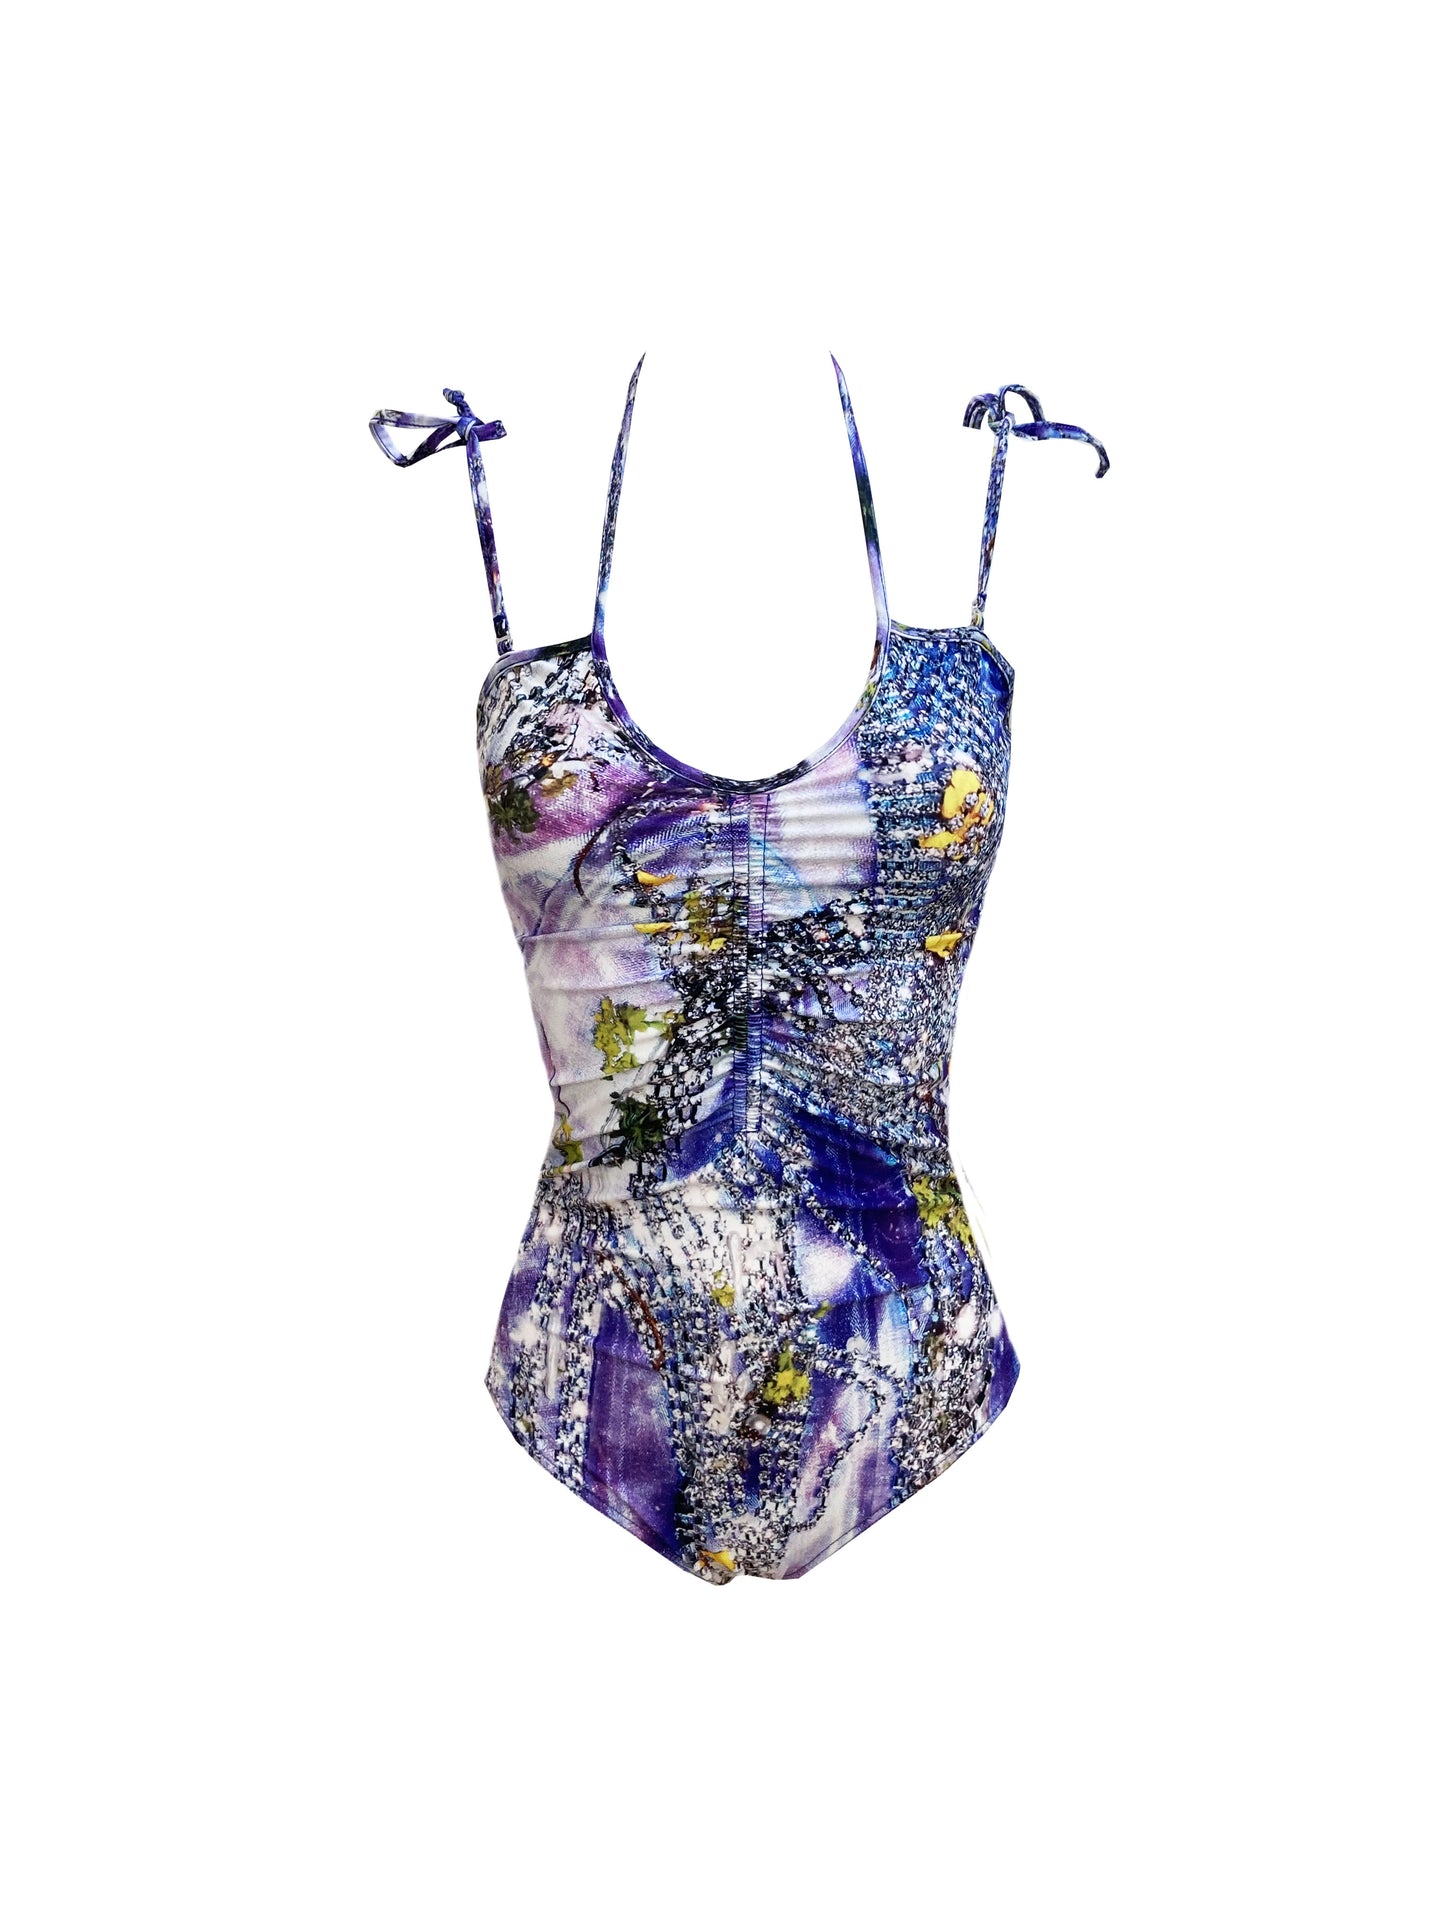 The In Bloom Swimsuit